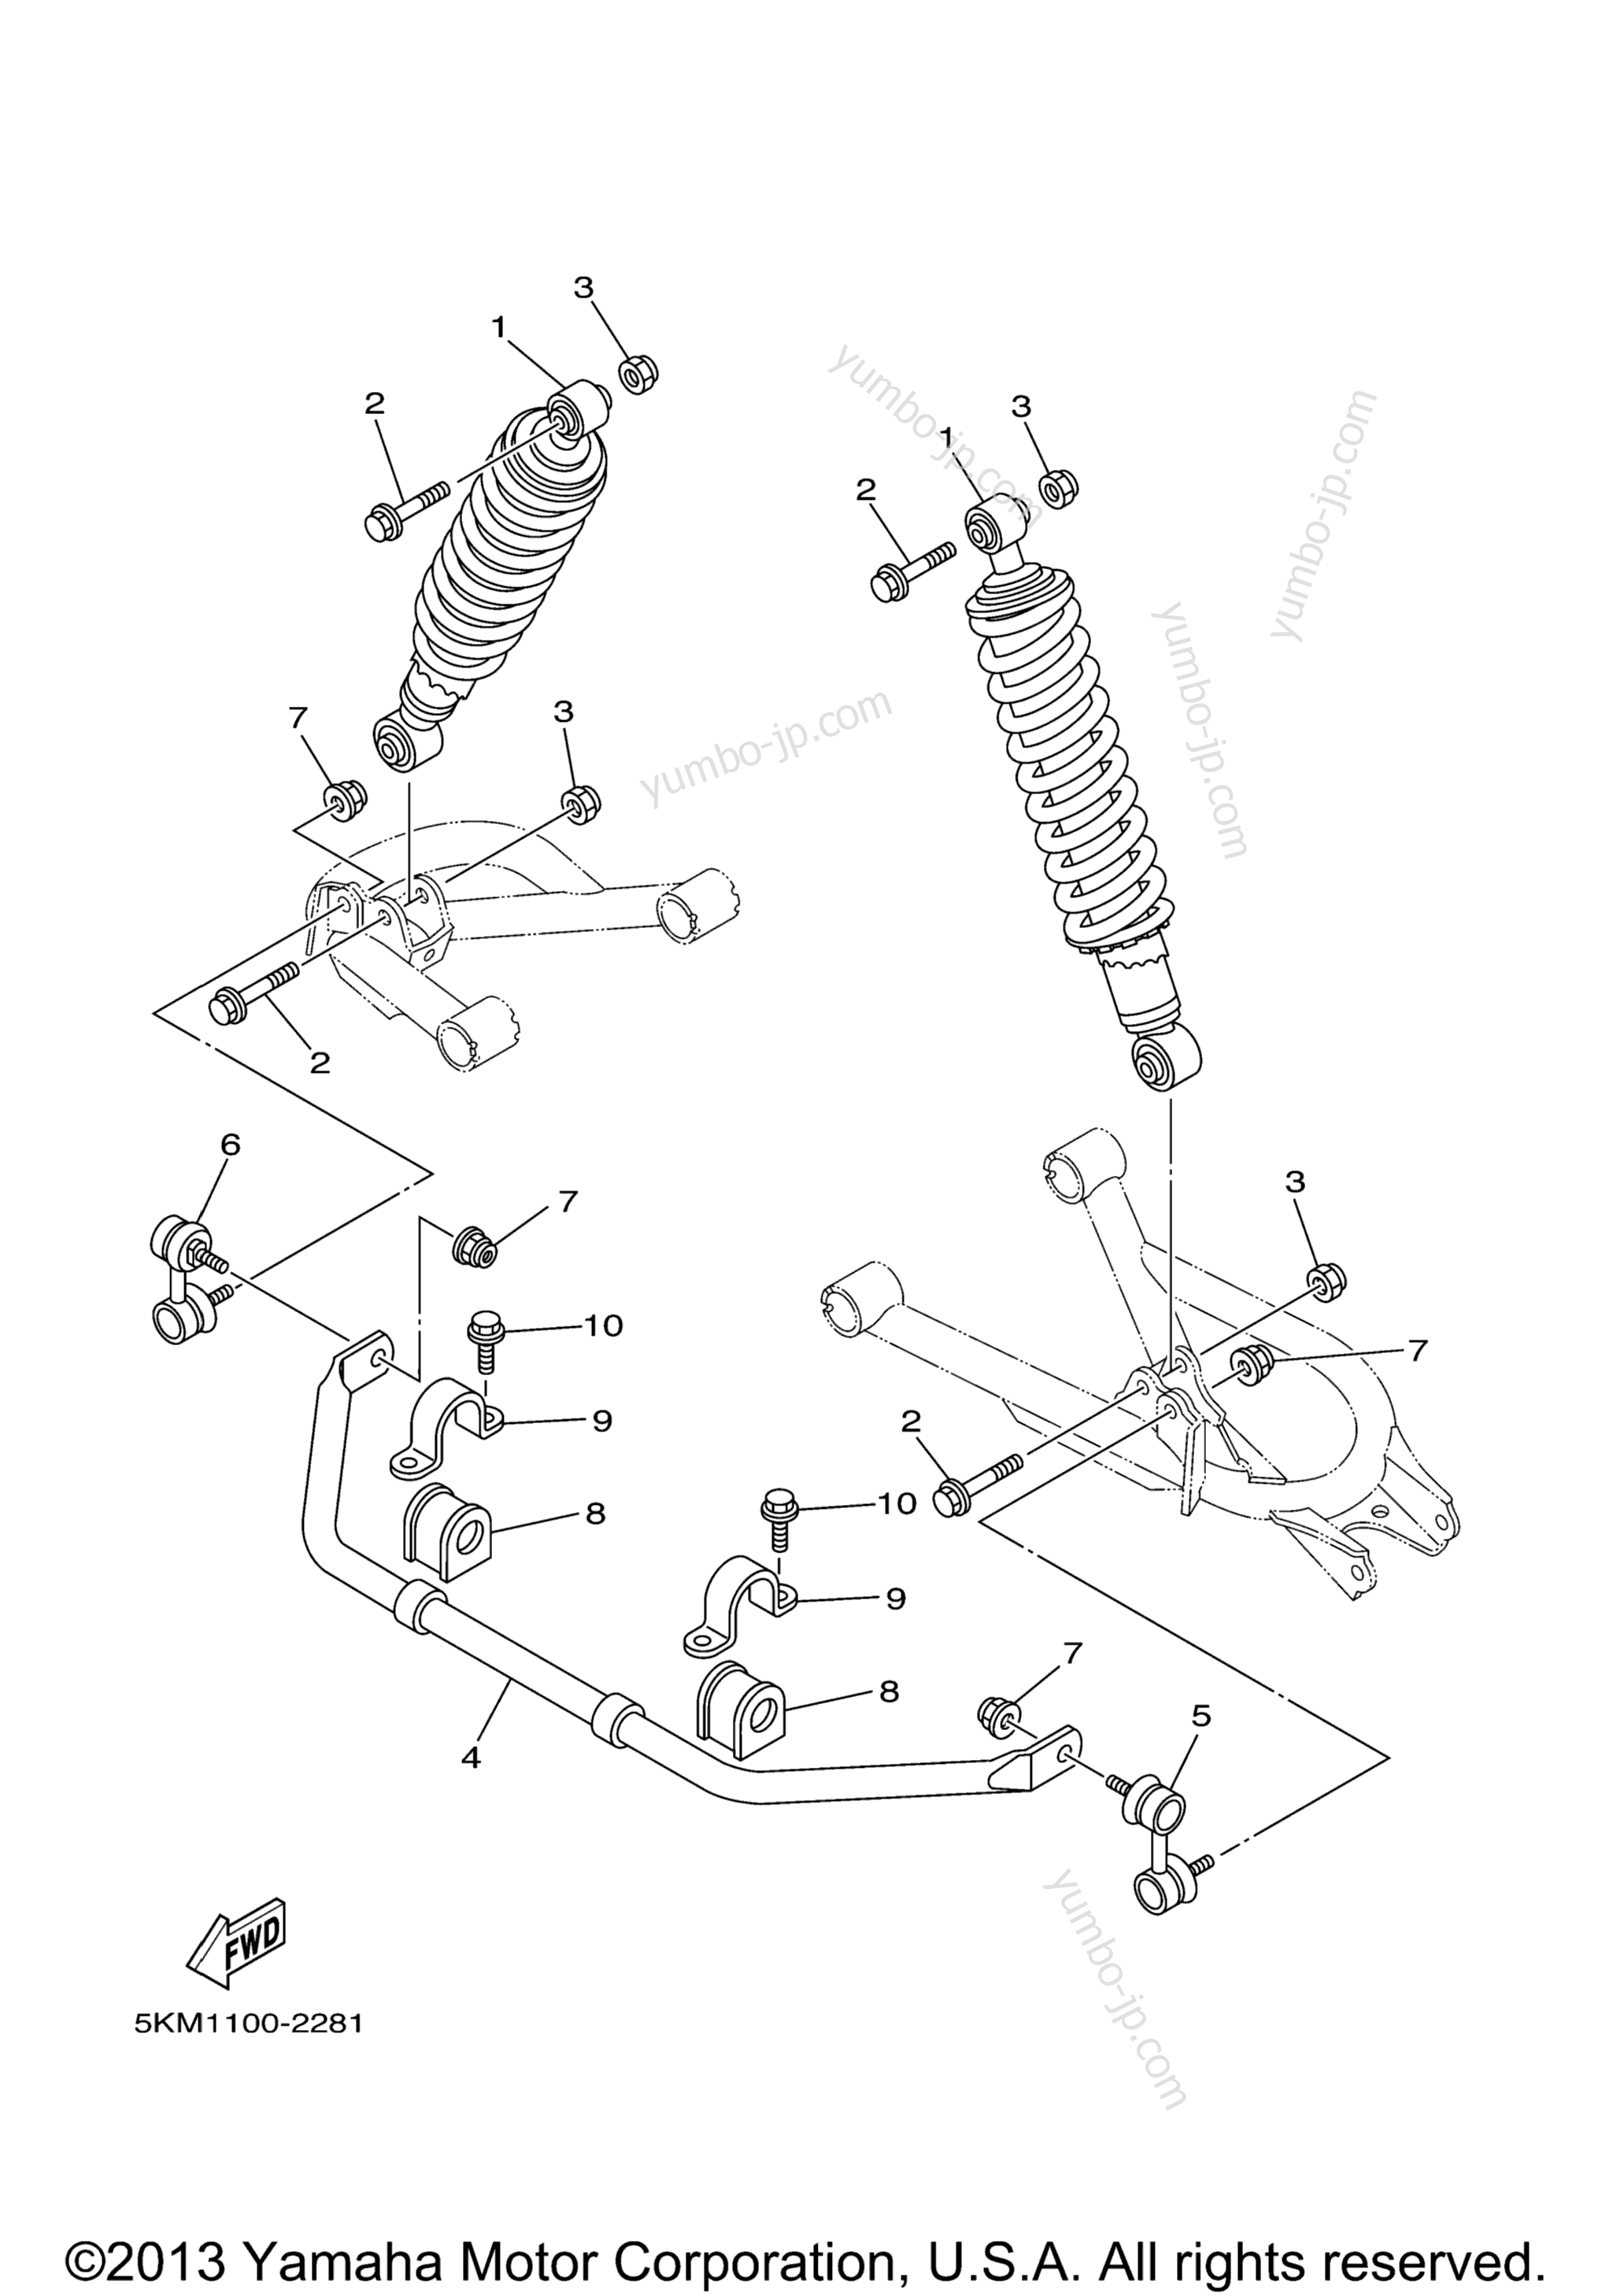 Rear Suspension for ATVs YAMAHA GRIZZLY 660 (YFM660FS) 2004 year